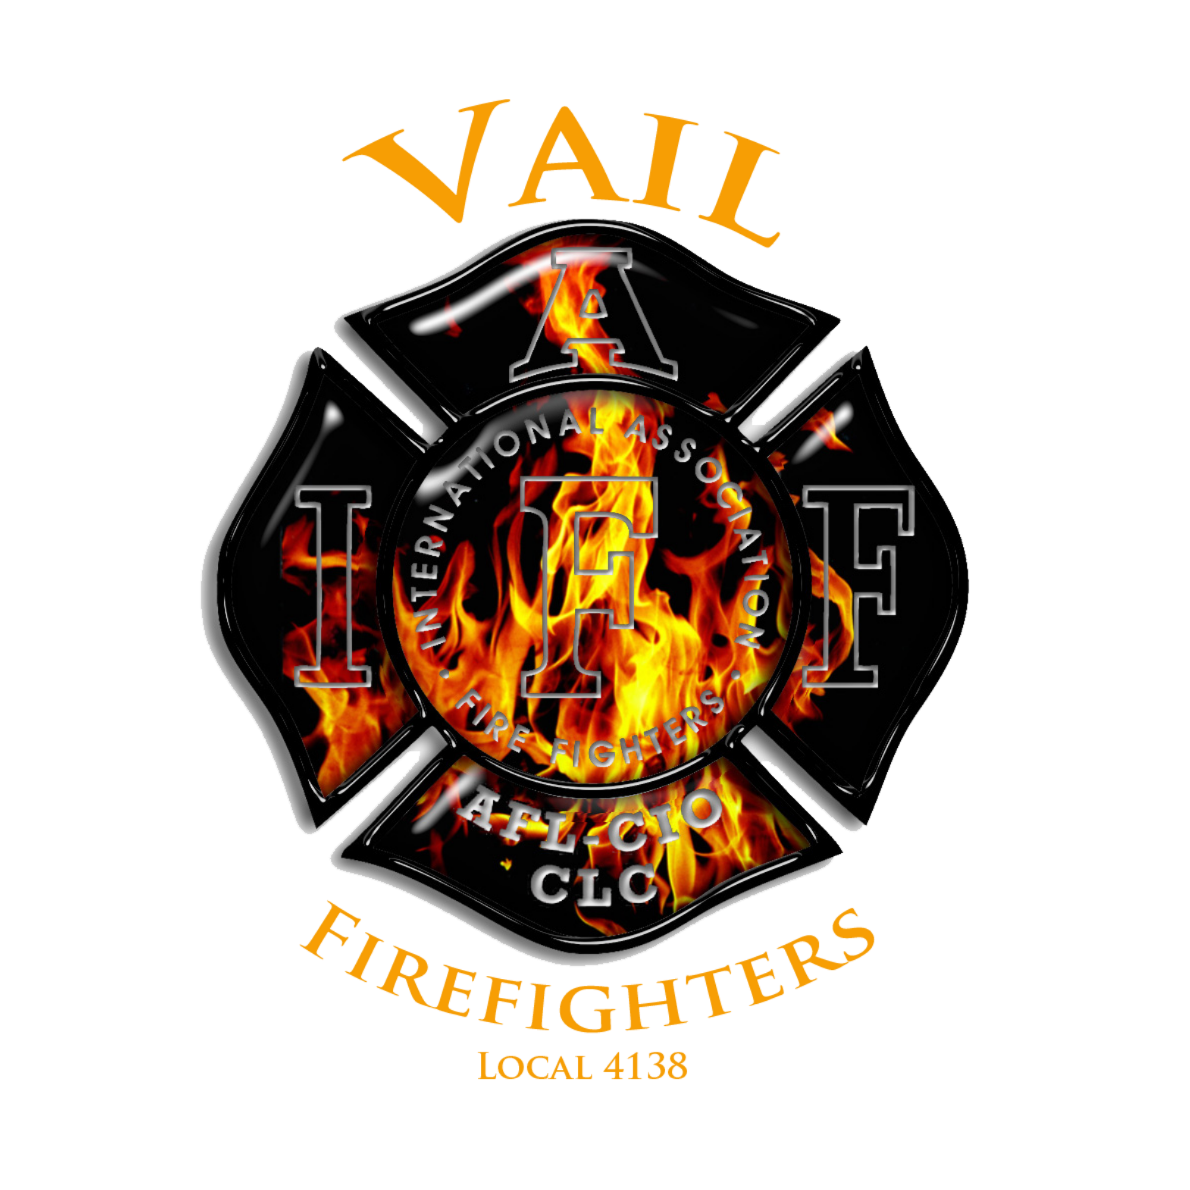 Vail Fire & Emergency Services Local 4138